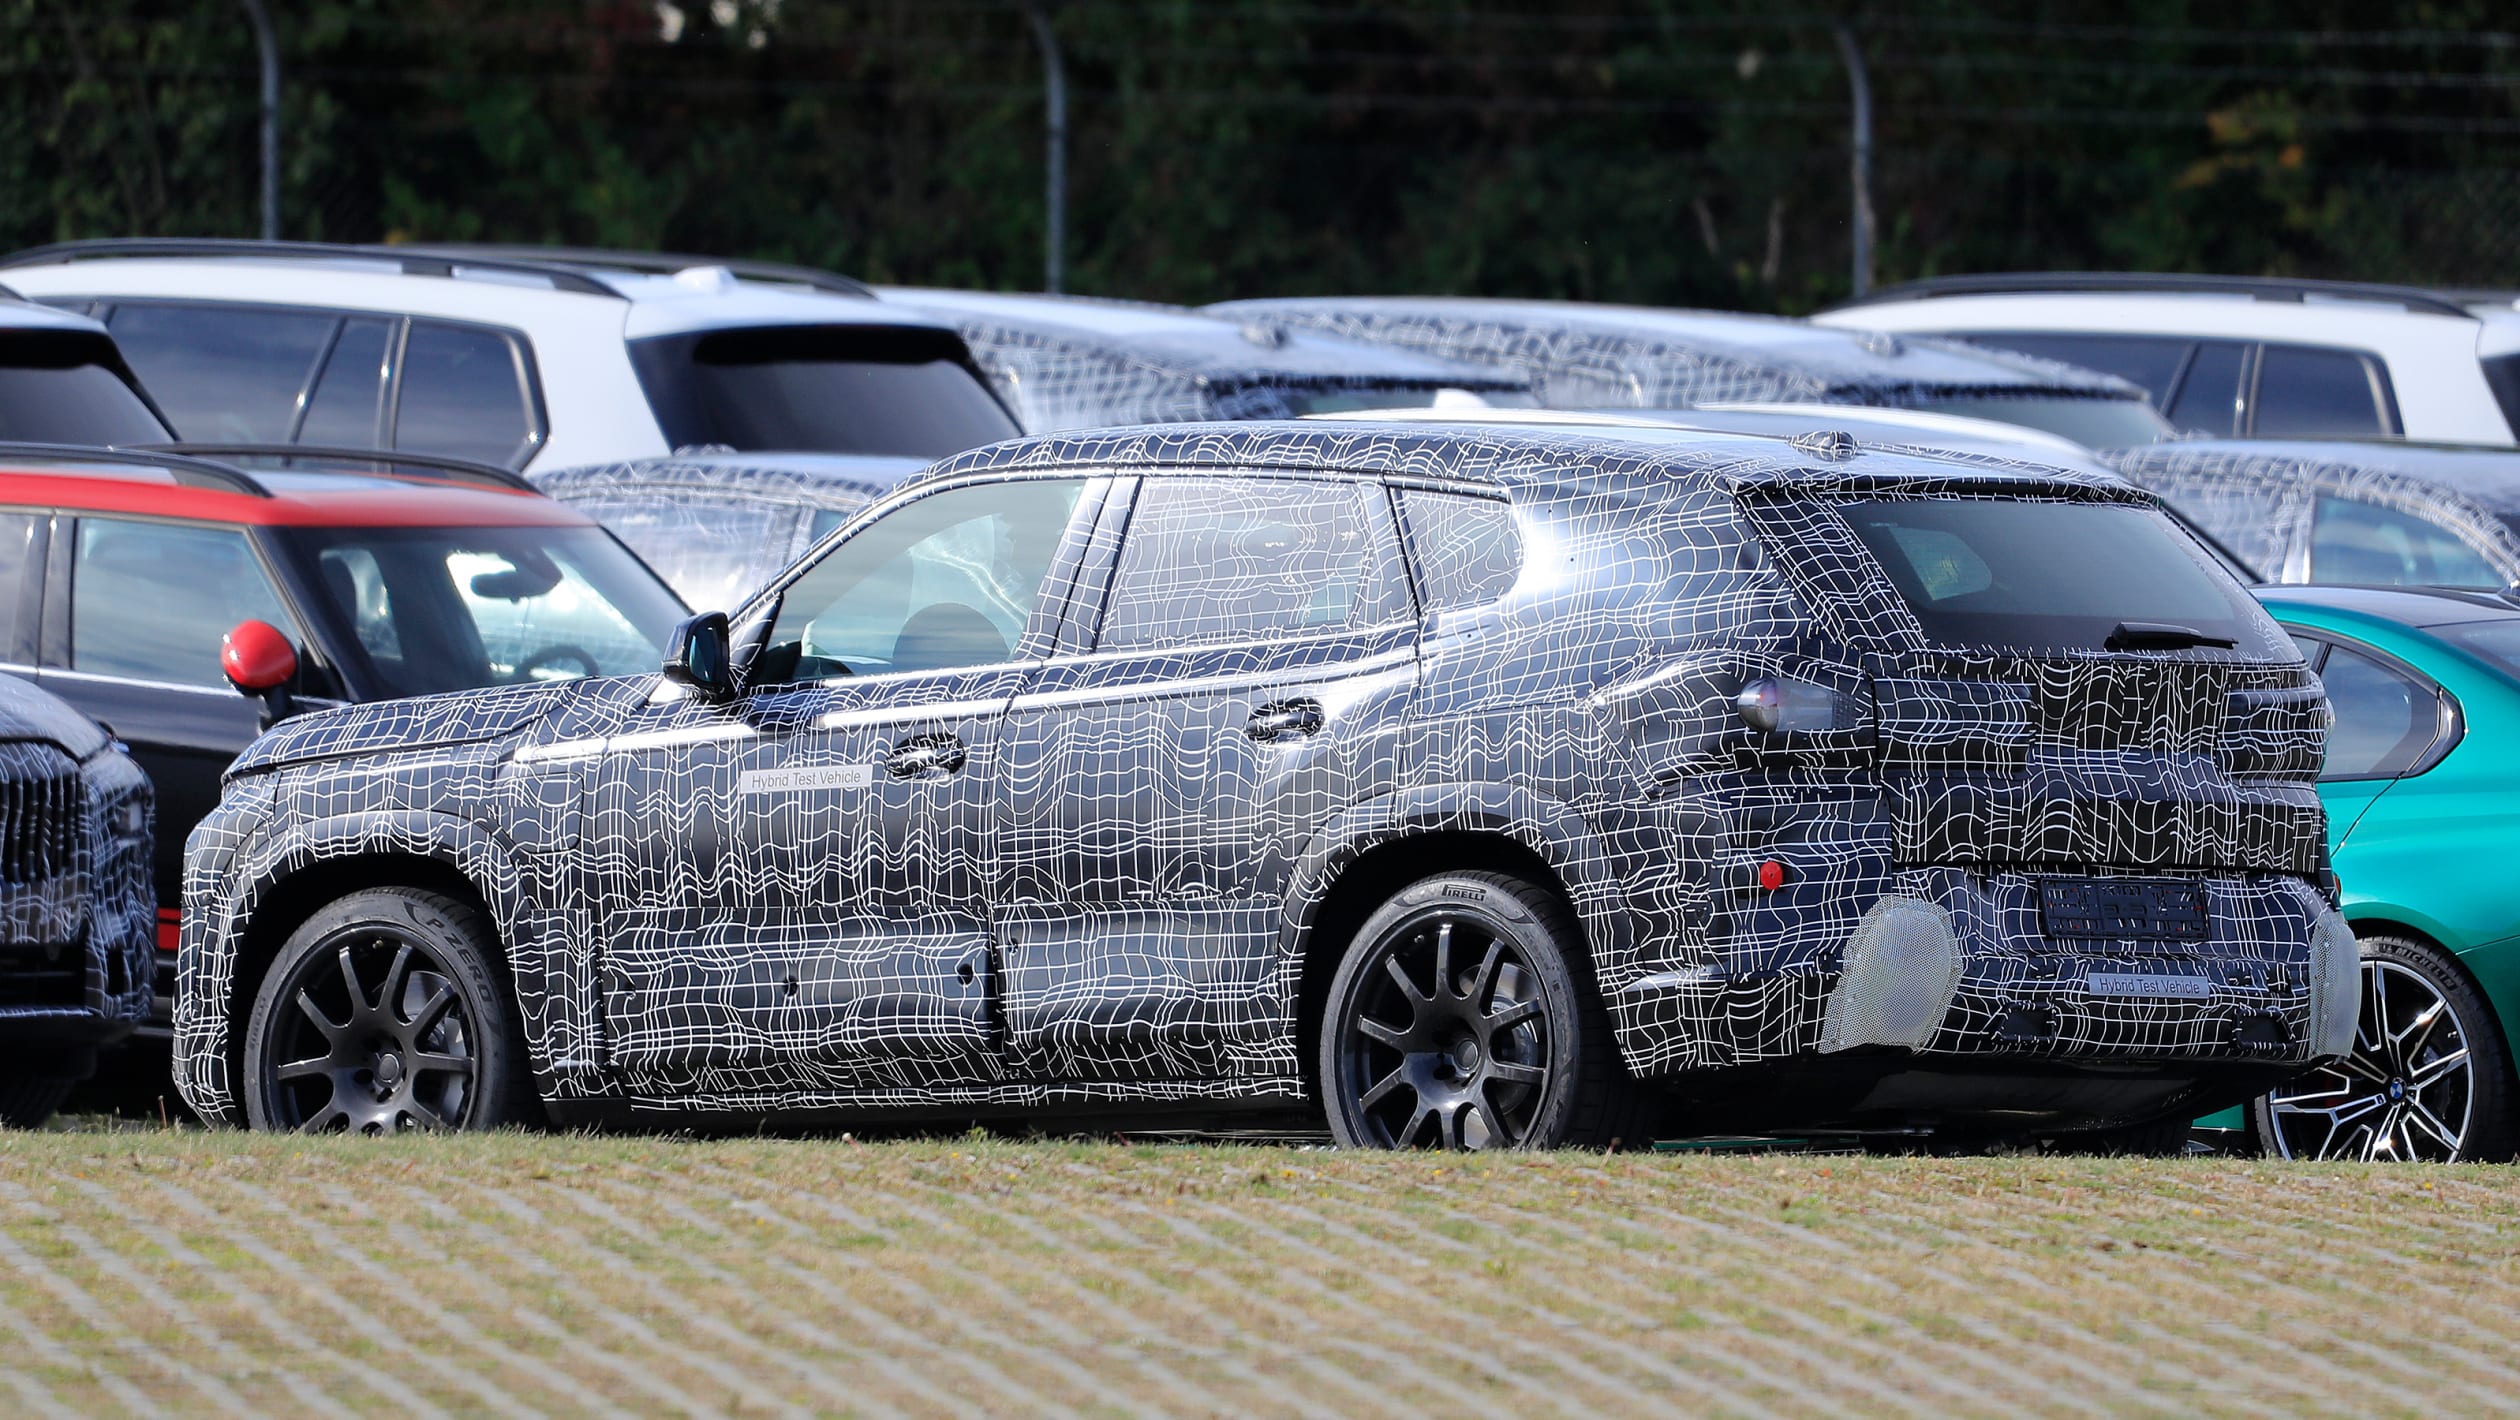 New BMW X8 SUV spied for the first time - pictures | Auto Express